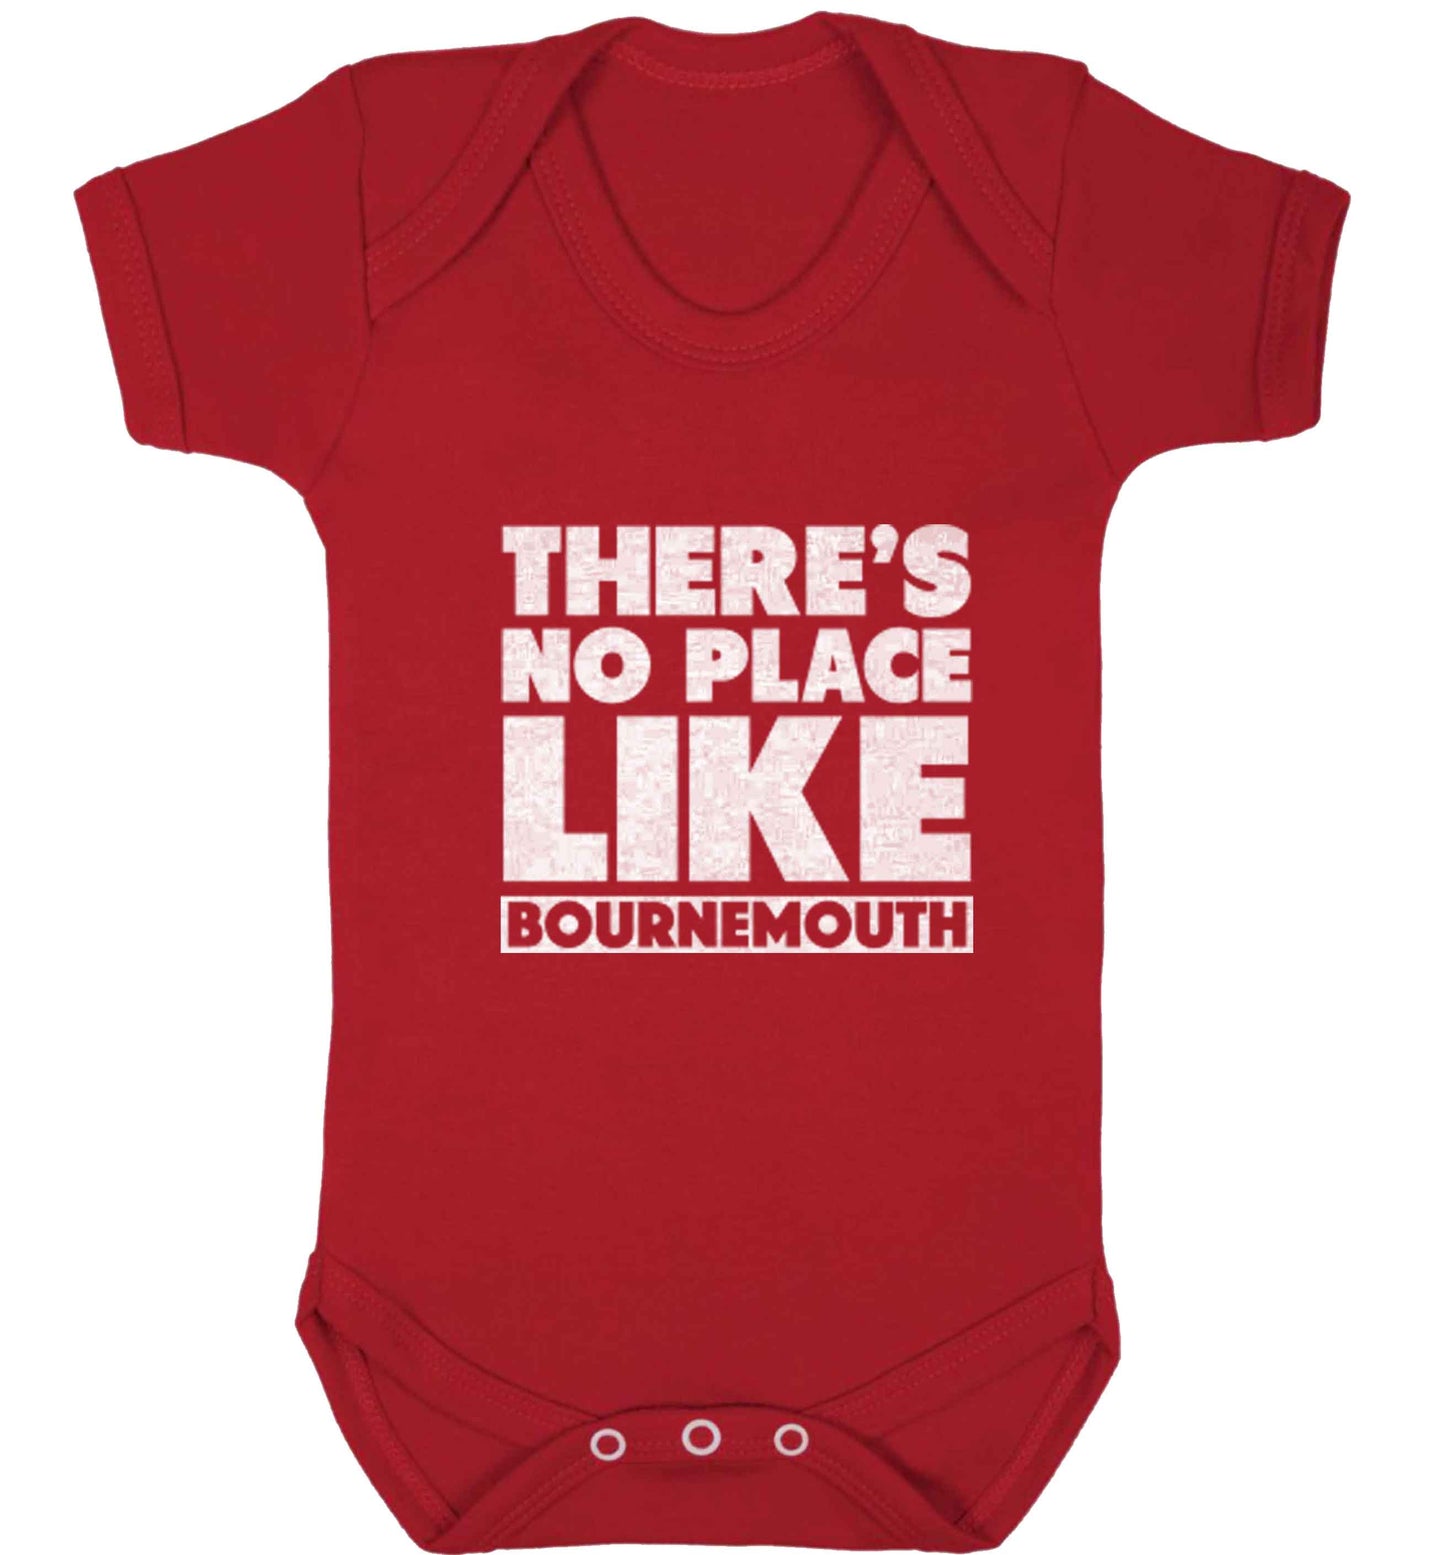 There's no place like Bournemouth baby vest red 18-24 months